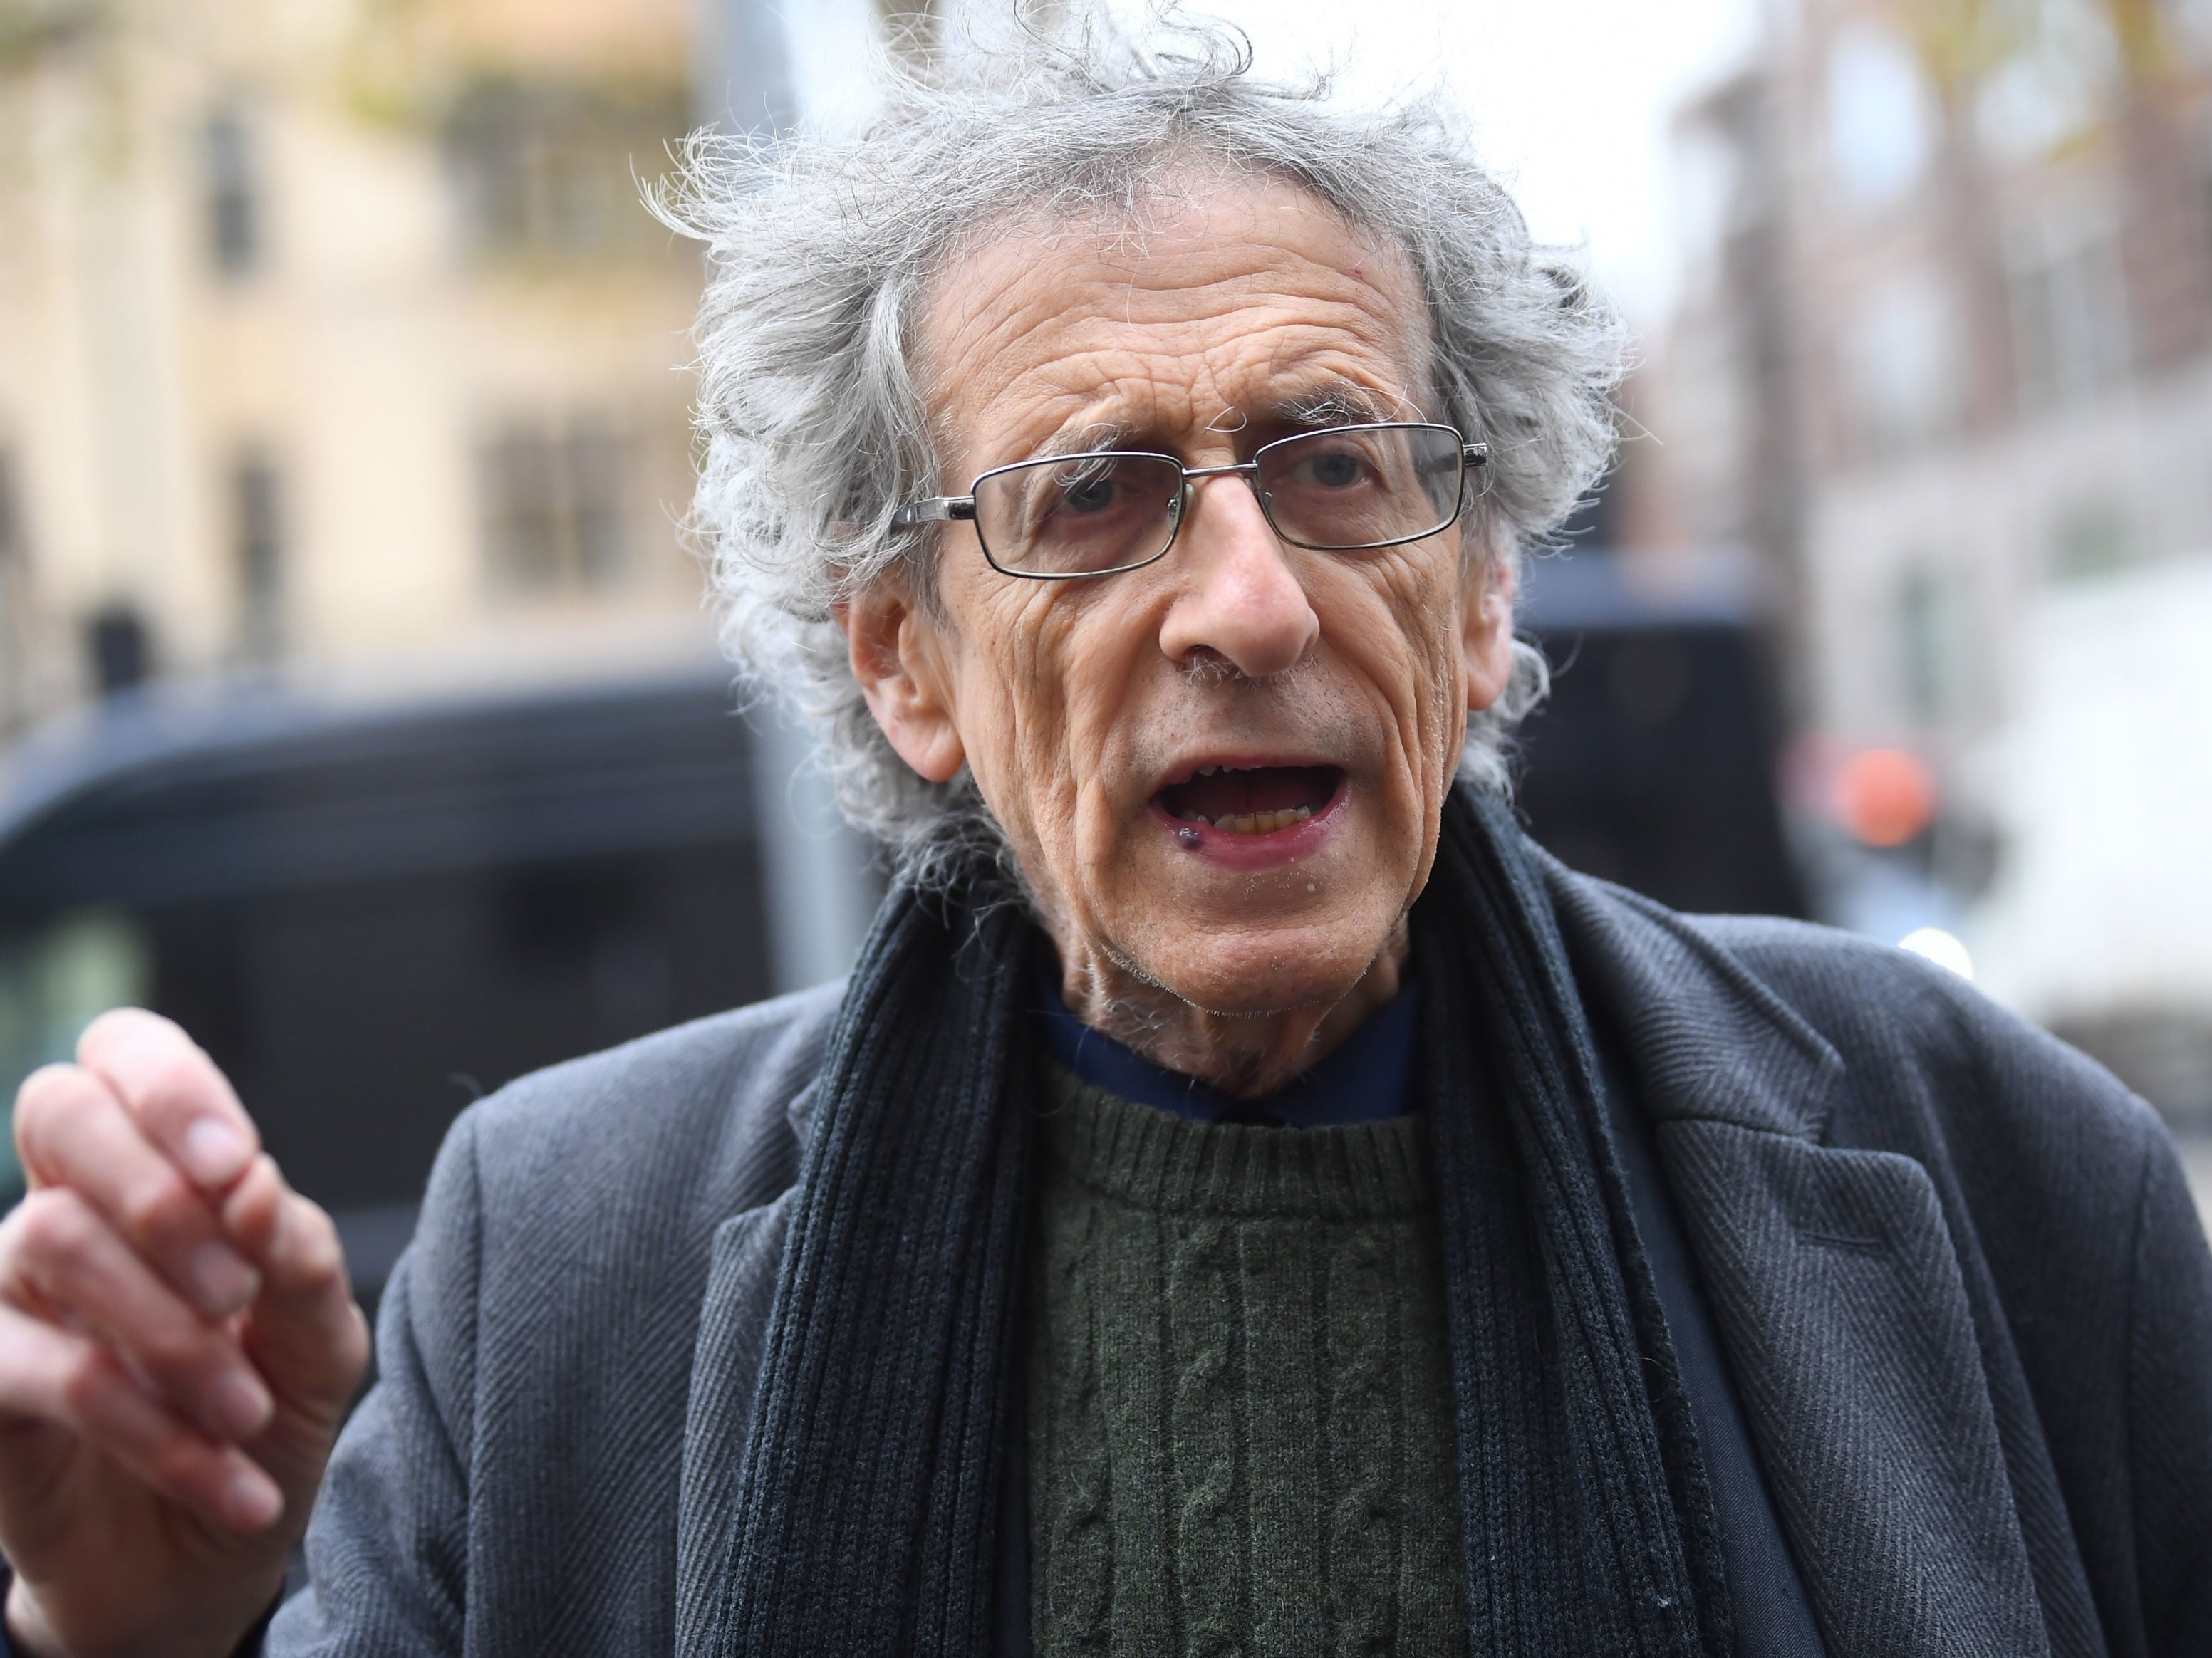 Piers Corbyn has been found guilty of breaking coronavirus laws during a protest in London’s Hyde Park